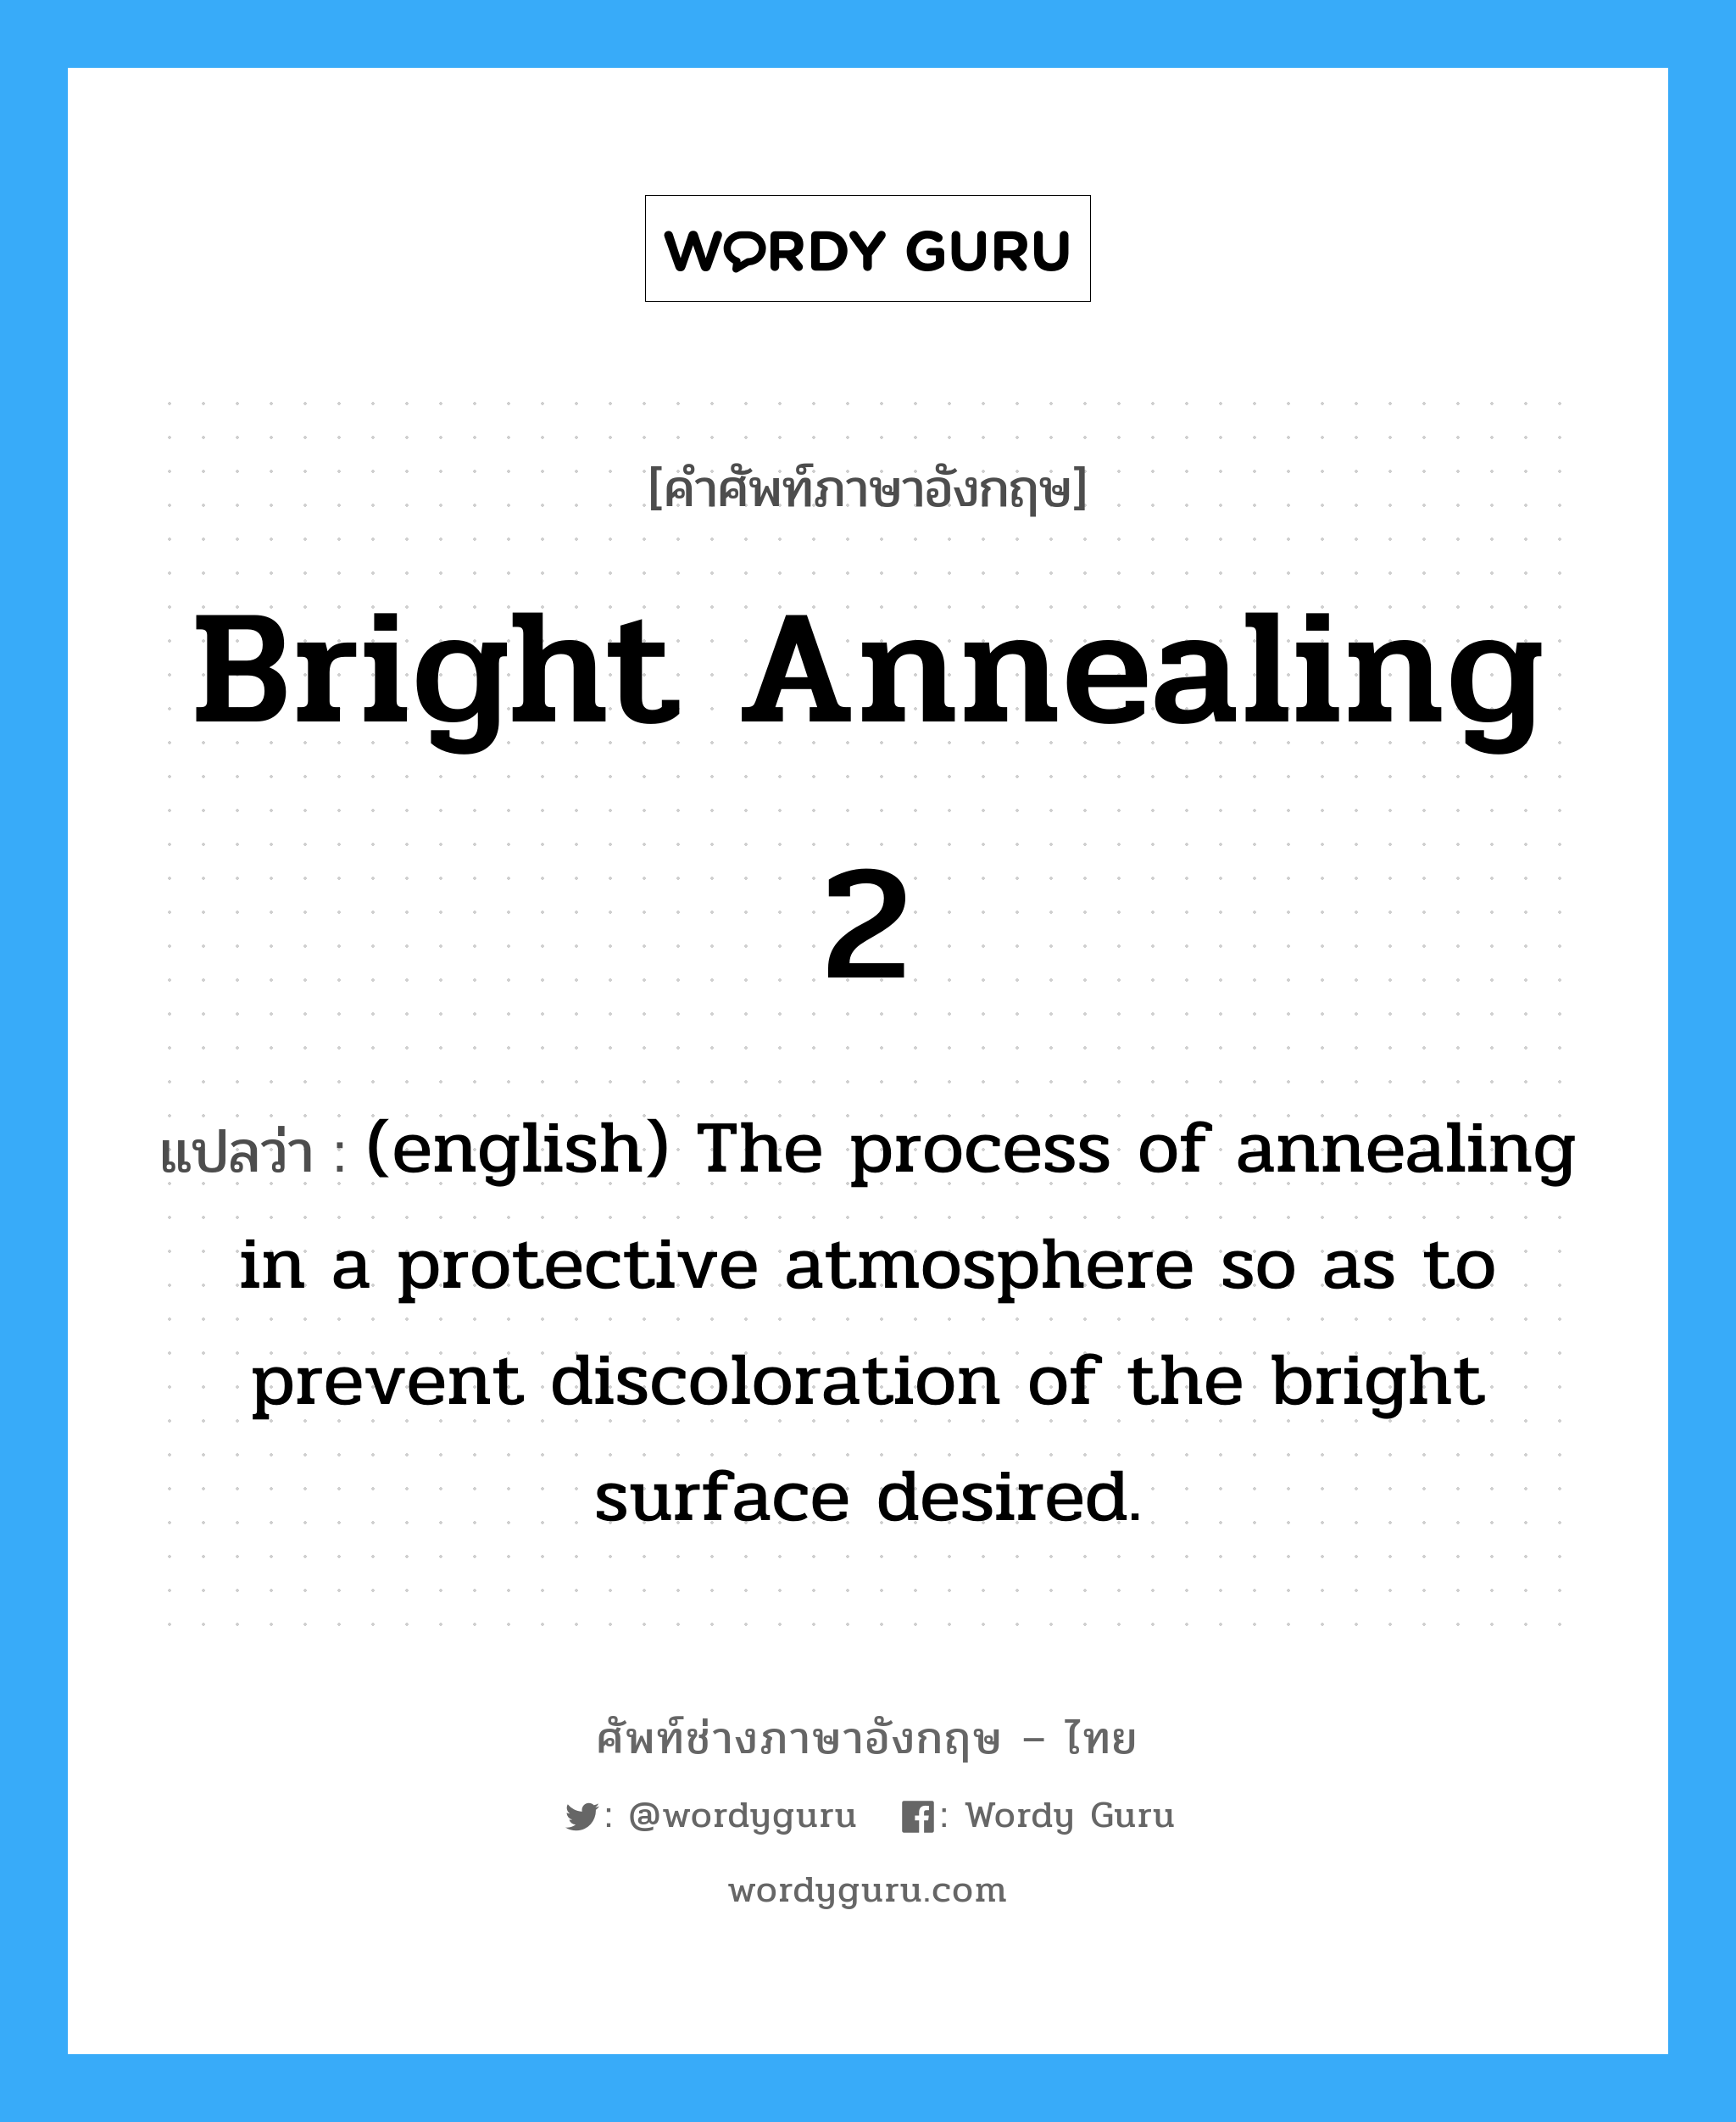 (english) The process of annealing in a protective atmosphere so as to prevent discoloration of the bright surface desired. ภาษาอังกฤษ?, คำศัพท์ช่างภาษาอังกฤษ - ไทย (english) The process of annealing in a protective atmosphere so as to prevent discoloration of the bright surface desired. คำศัพท์ภาษาอังกฤษ (english) The process of annealing in a protective atmosphere so as to prevent discoloration of the bright surface desired. แปลว่า Bright Annealing 2